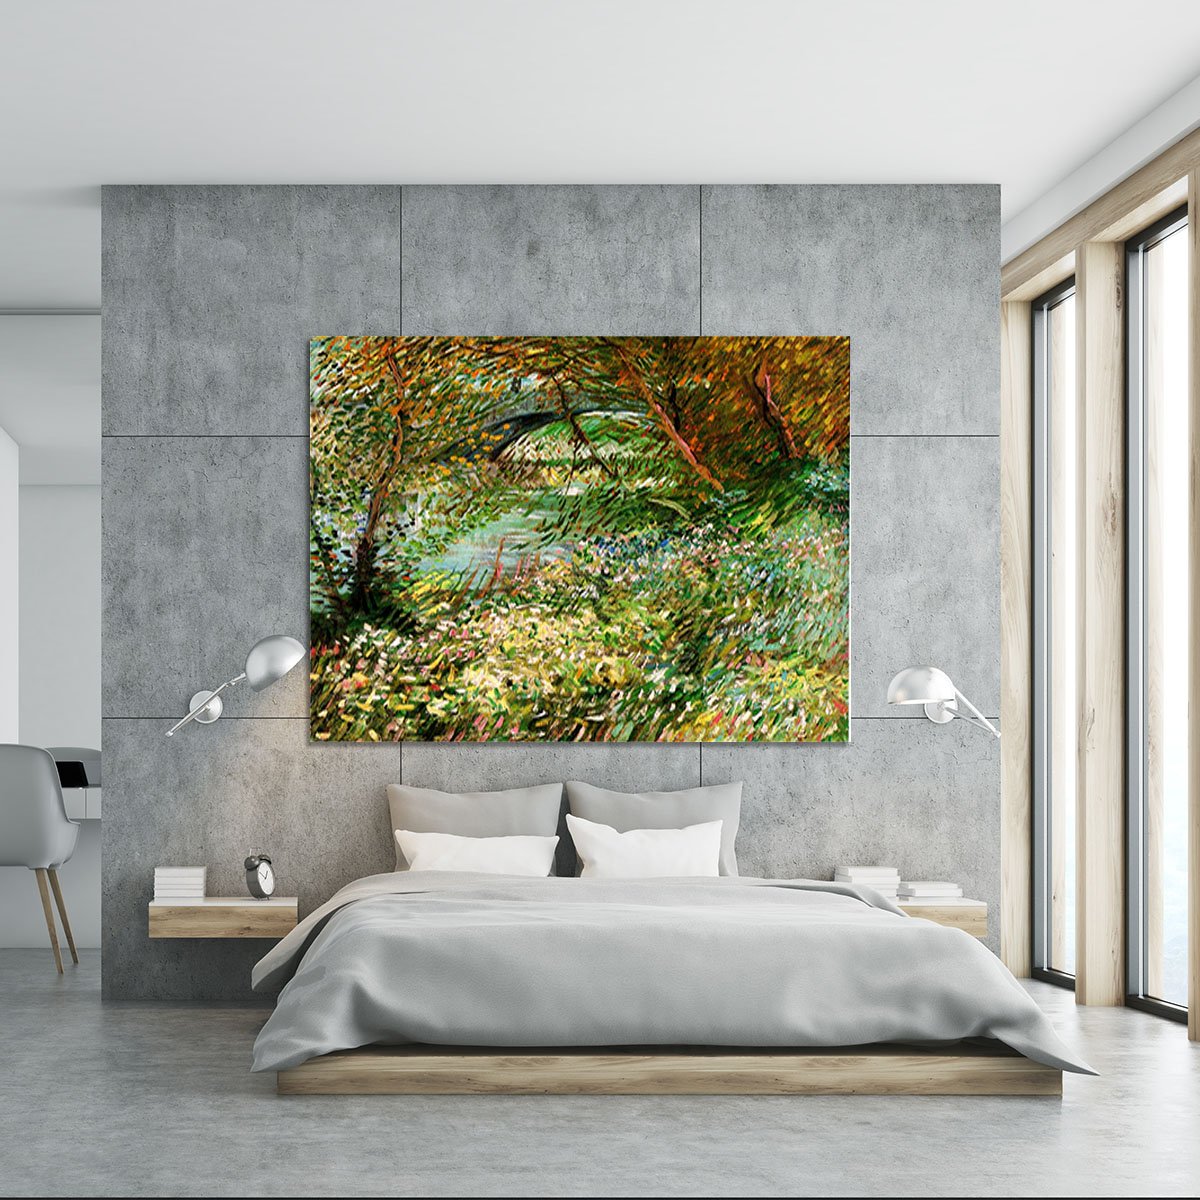 Banks of the Seine with Pont de Clichy in the Spring by Van Gogh Canvas Print or Poster